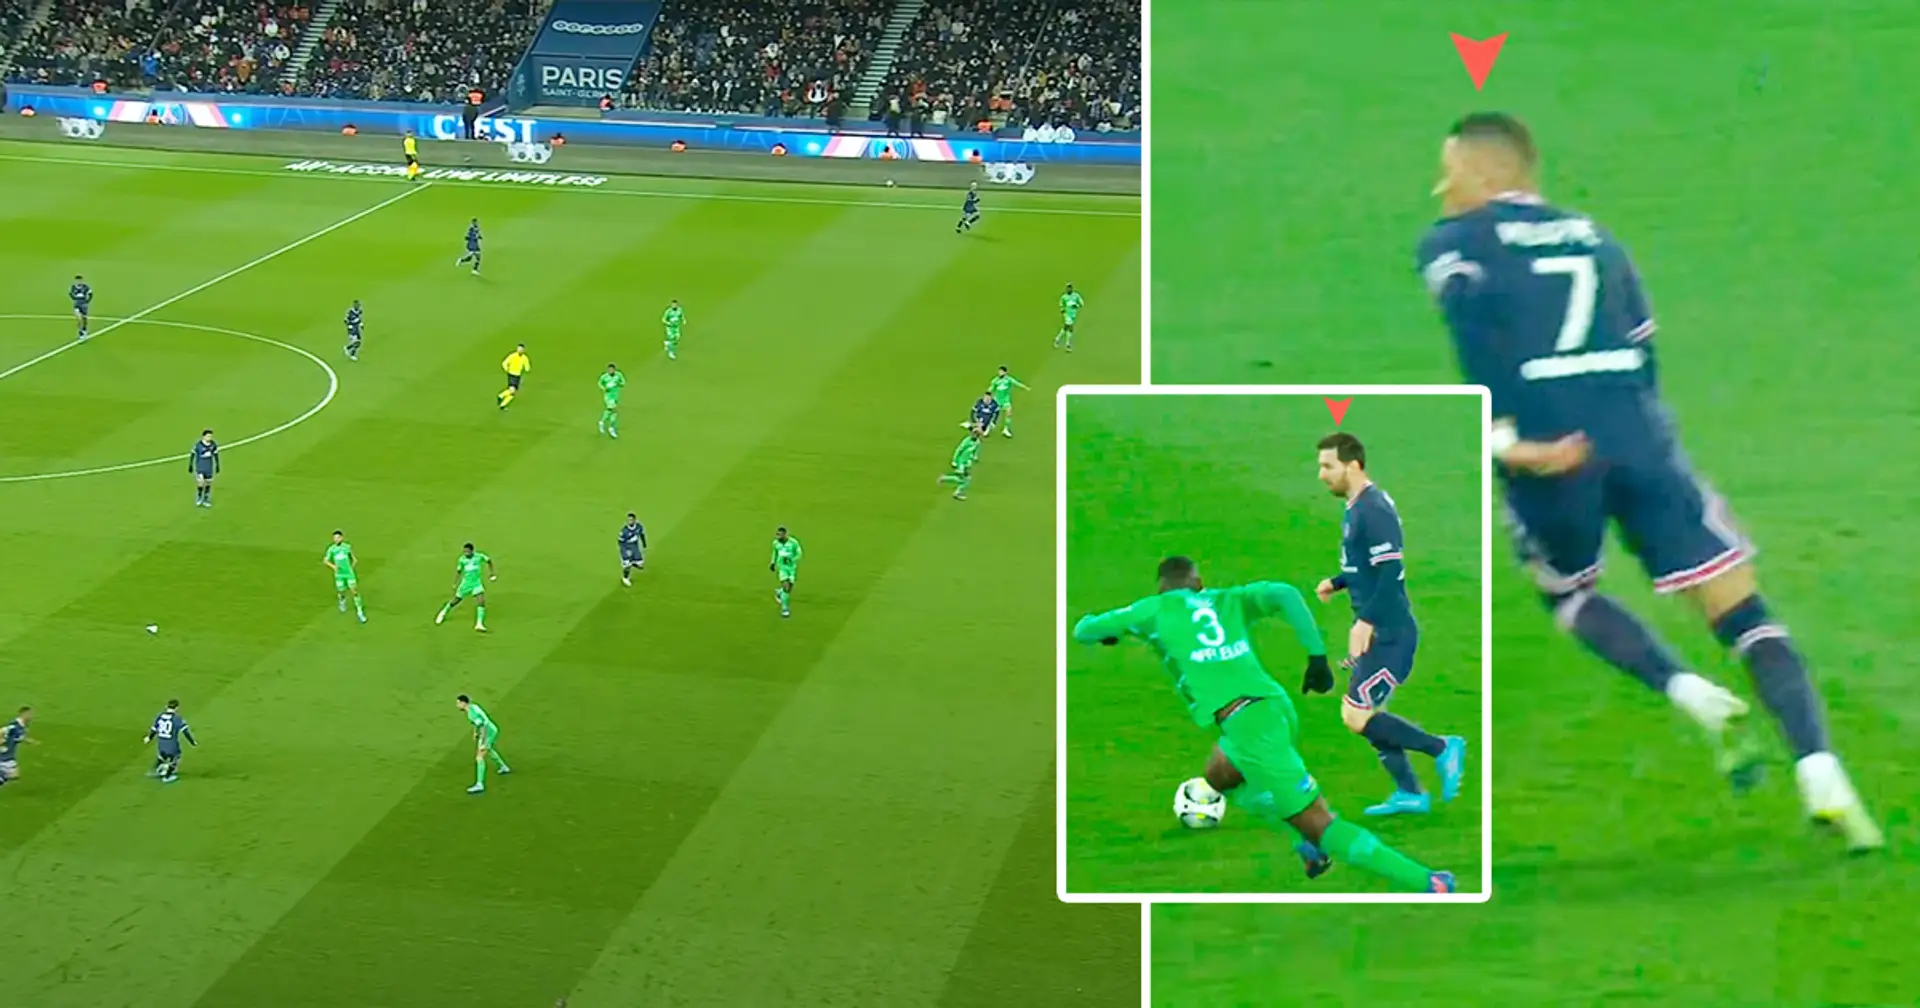 Messi shows off his insane vision as he produces spectacular assist to Mbappe